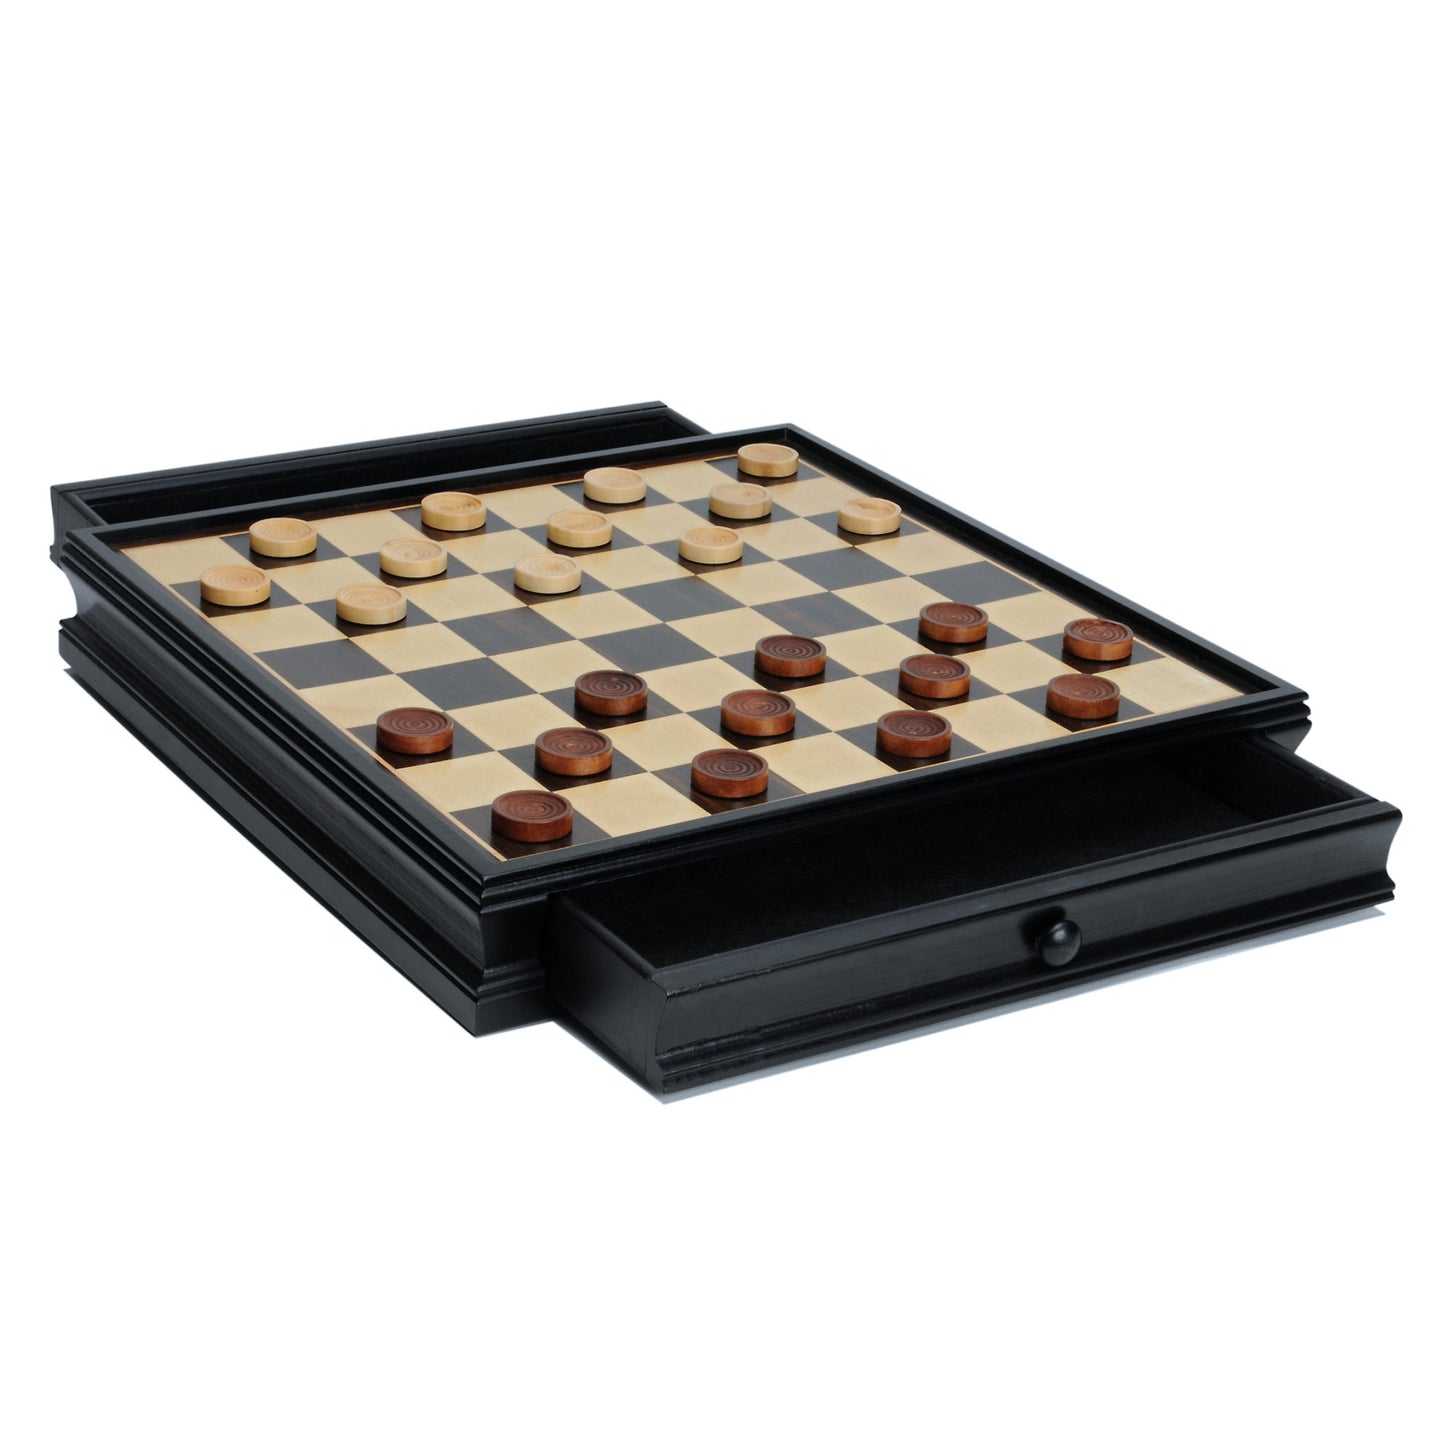 Russian Style Chess & Checkers Game Set – Weighted Chessmen & Black Stained Wood Board with Storage Drawers 15 in.